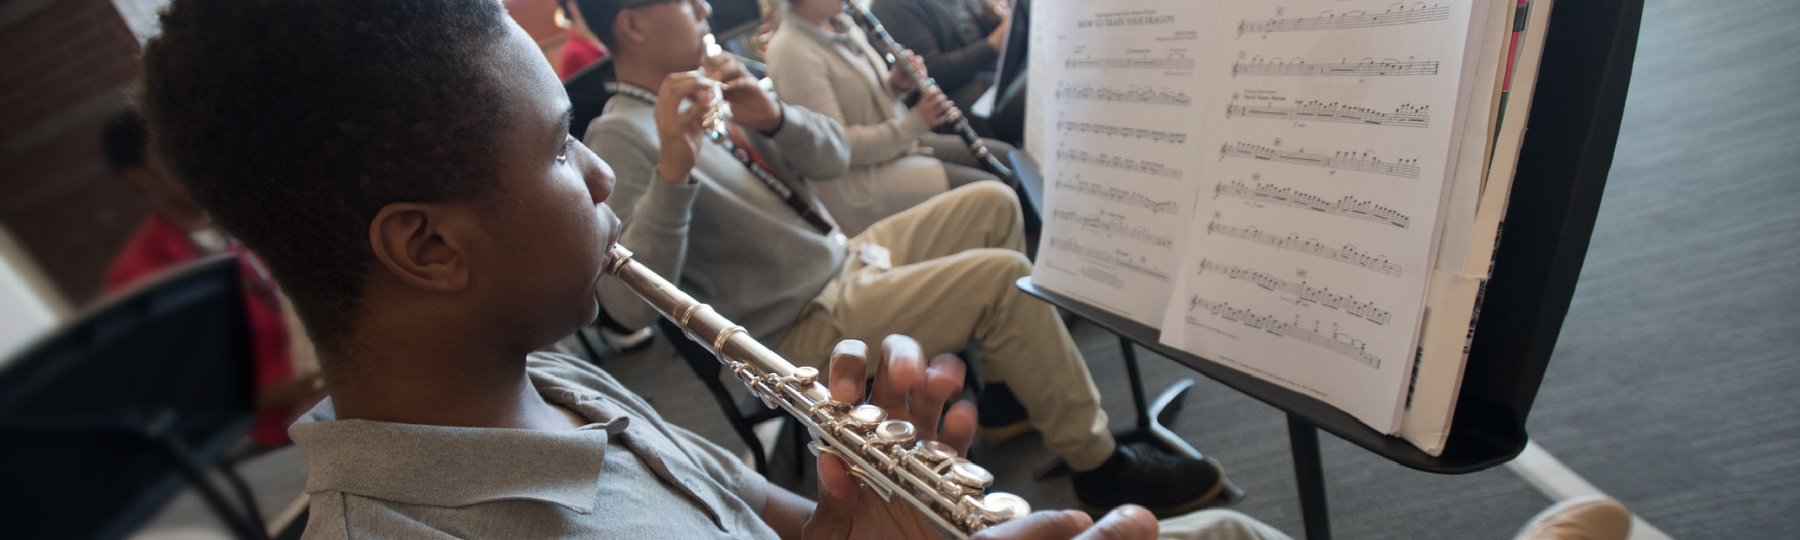 A high school student plays flute with his classmates during music class.